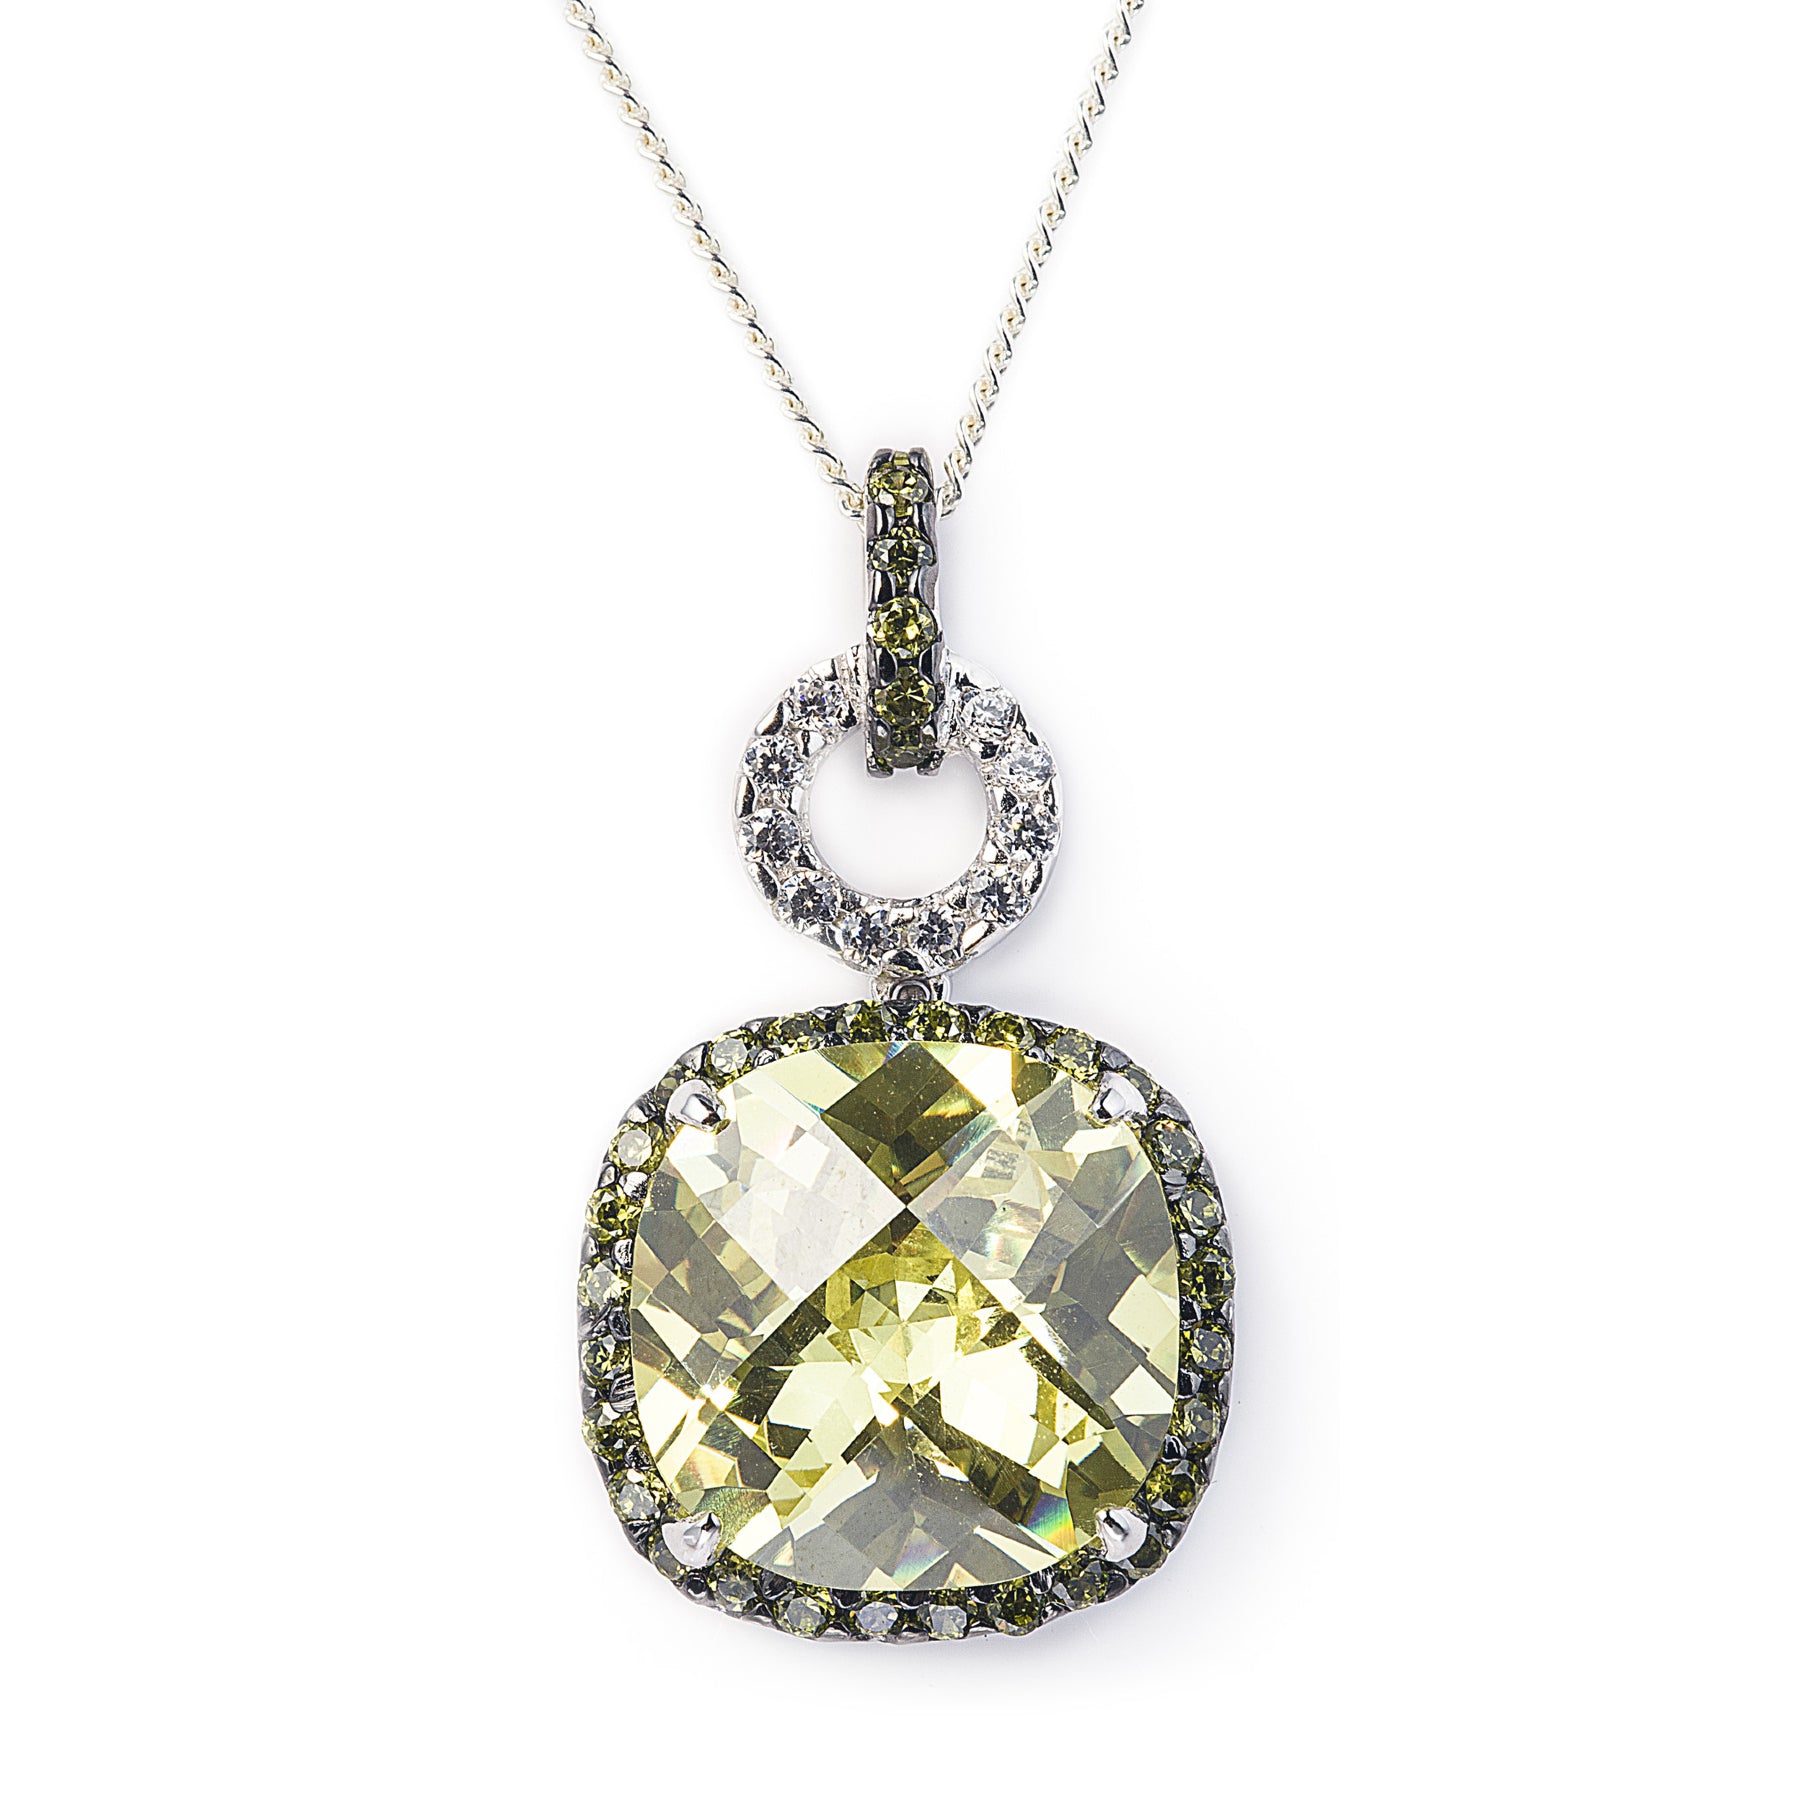 Antique Style 925 Sterling Silver necklace featuring a stunning Green Peridot stone surrounded by dainty black Cubic Zirconia Stones.